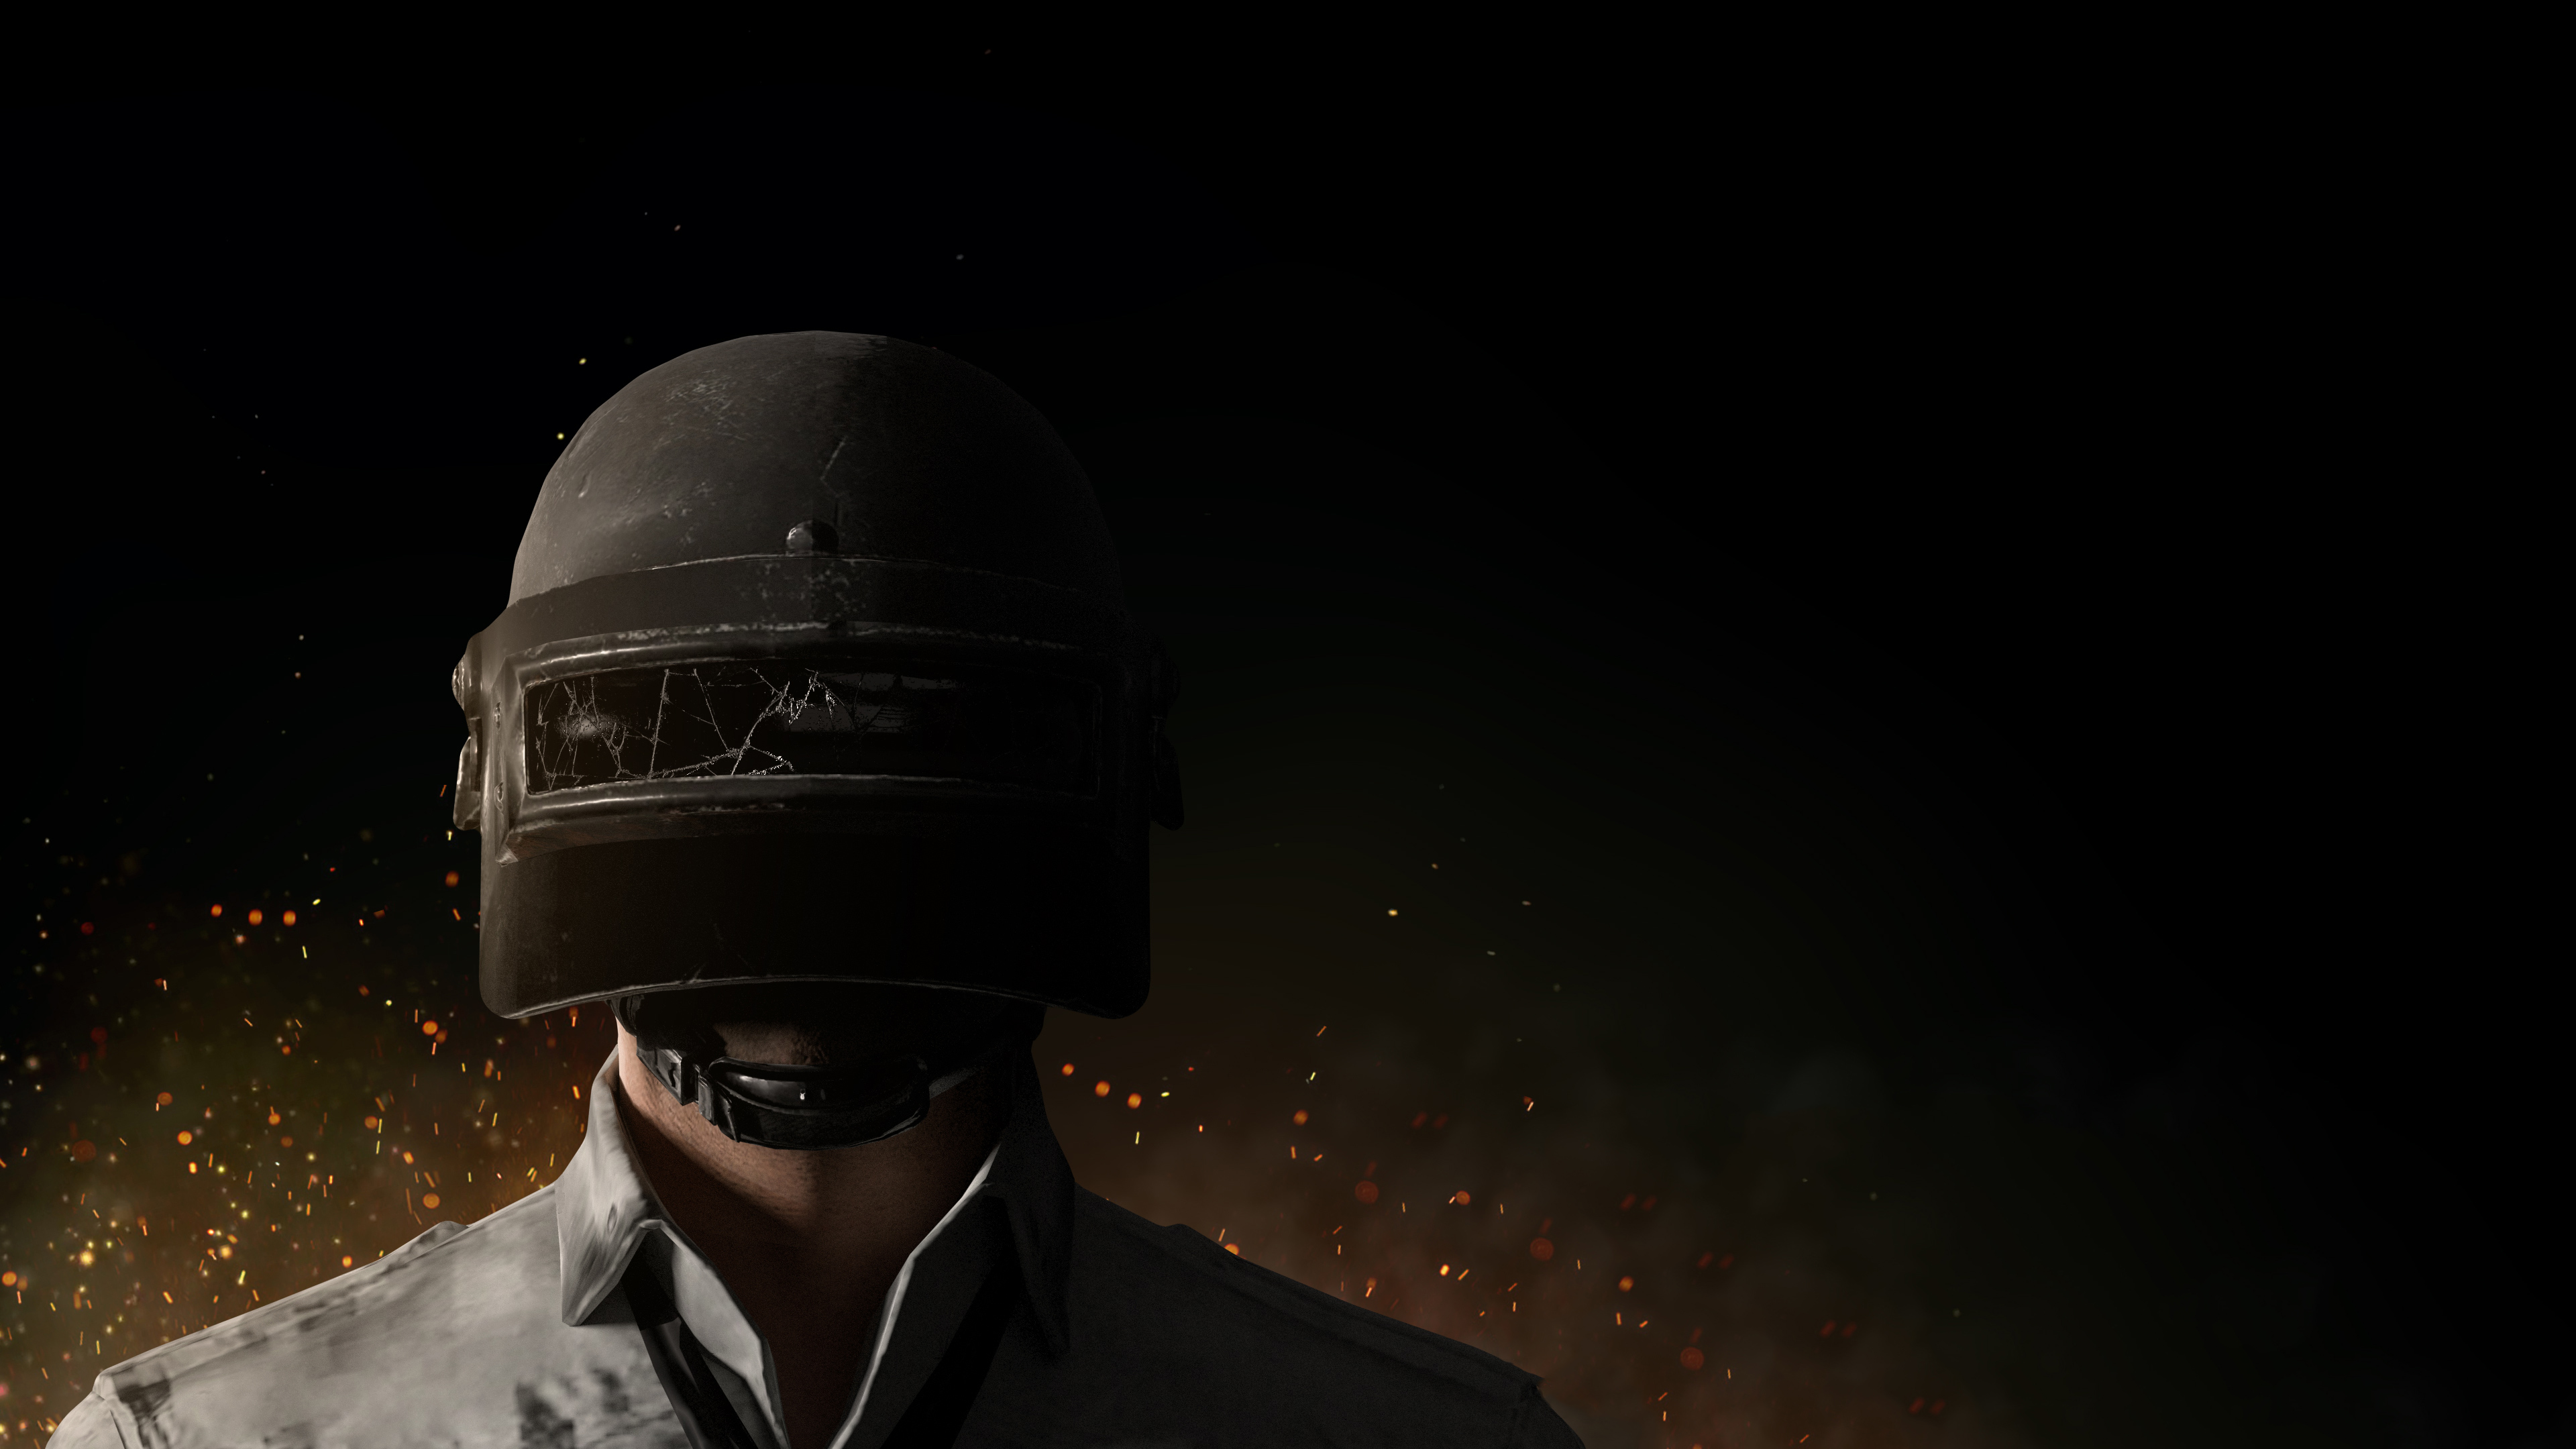 hd wallpapers for pc,darkness,sky,headgear,personal protective equipment,night